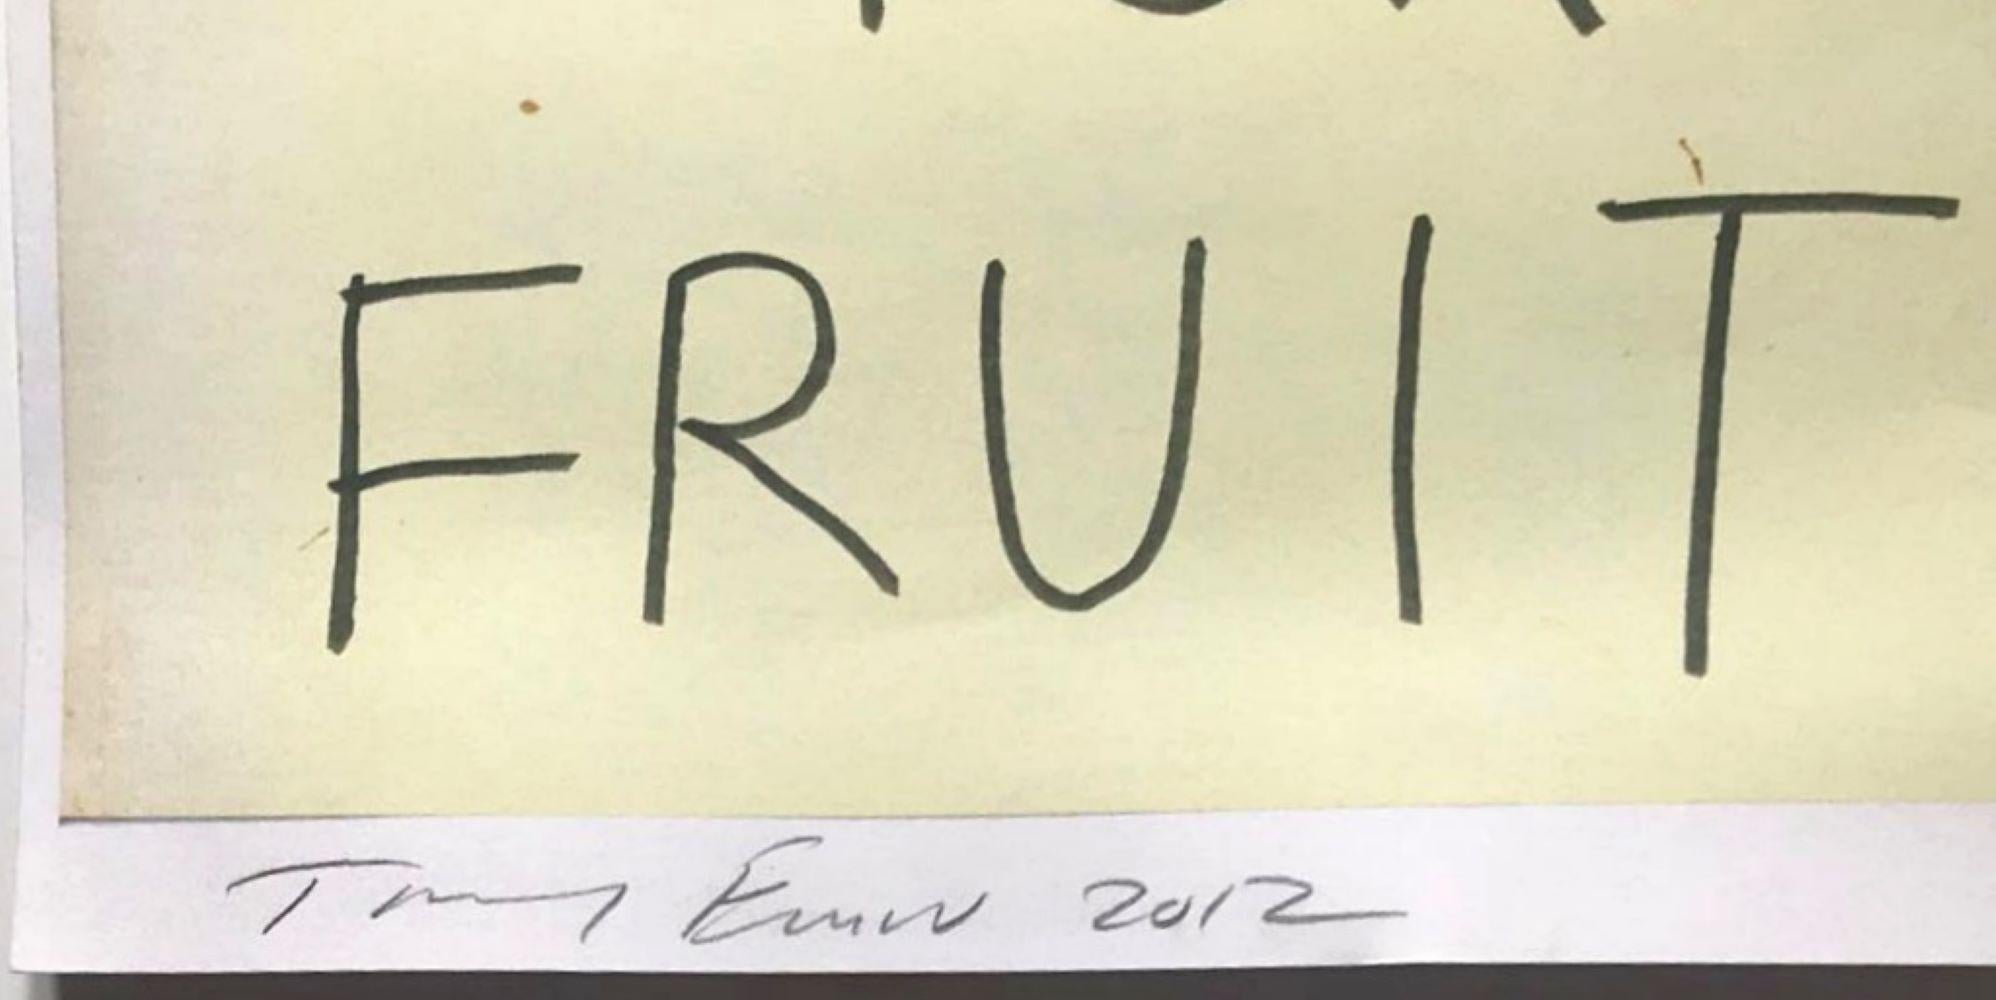 Reach Out for Fruit - Print by Tracey Emin